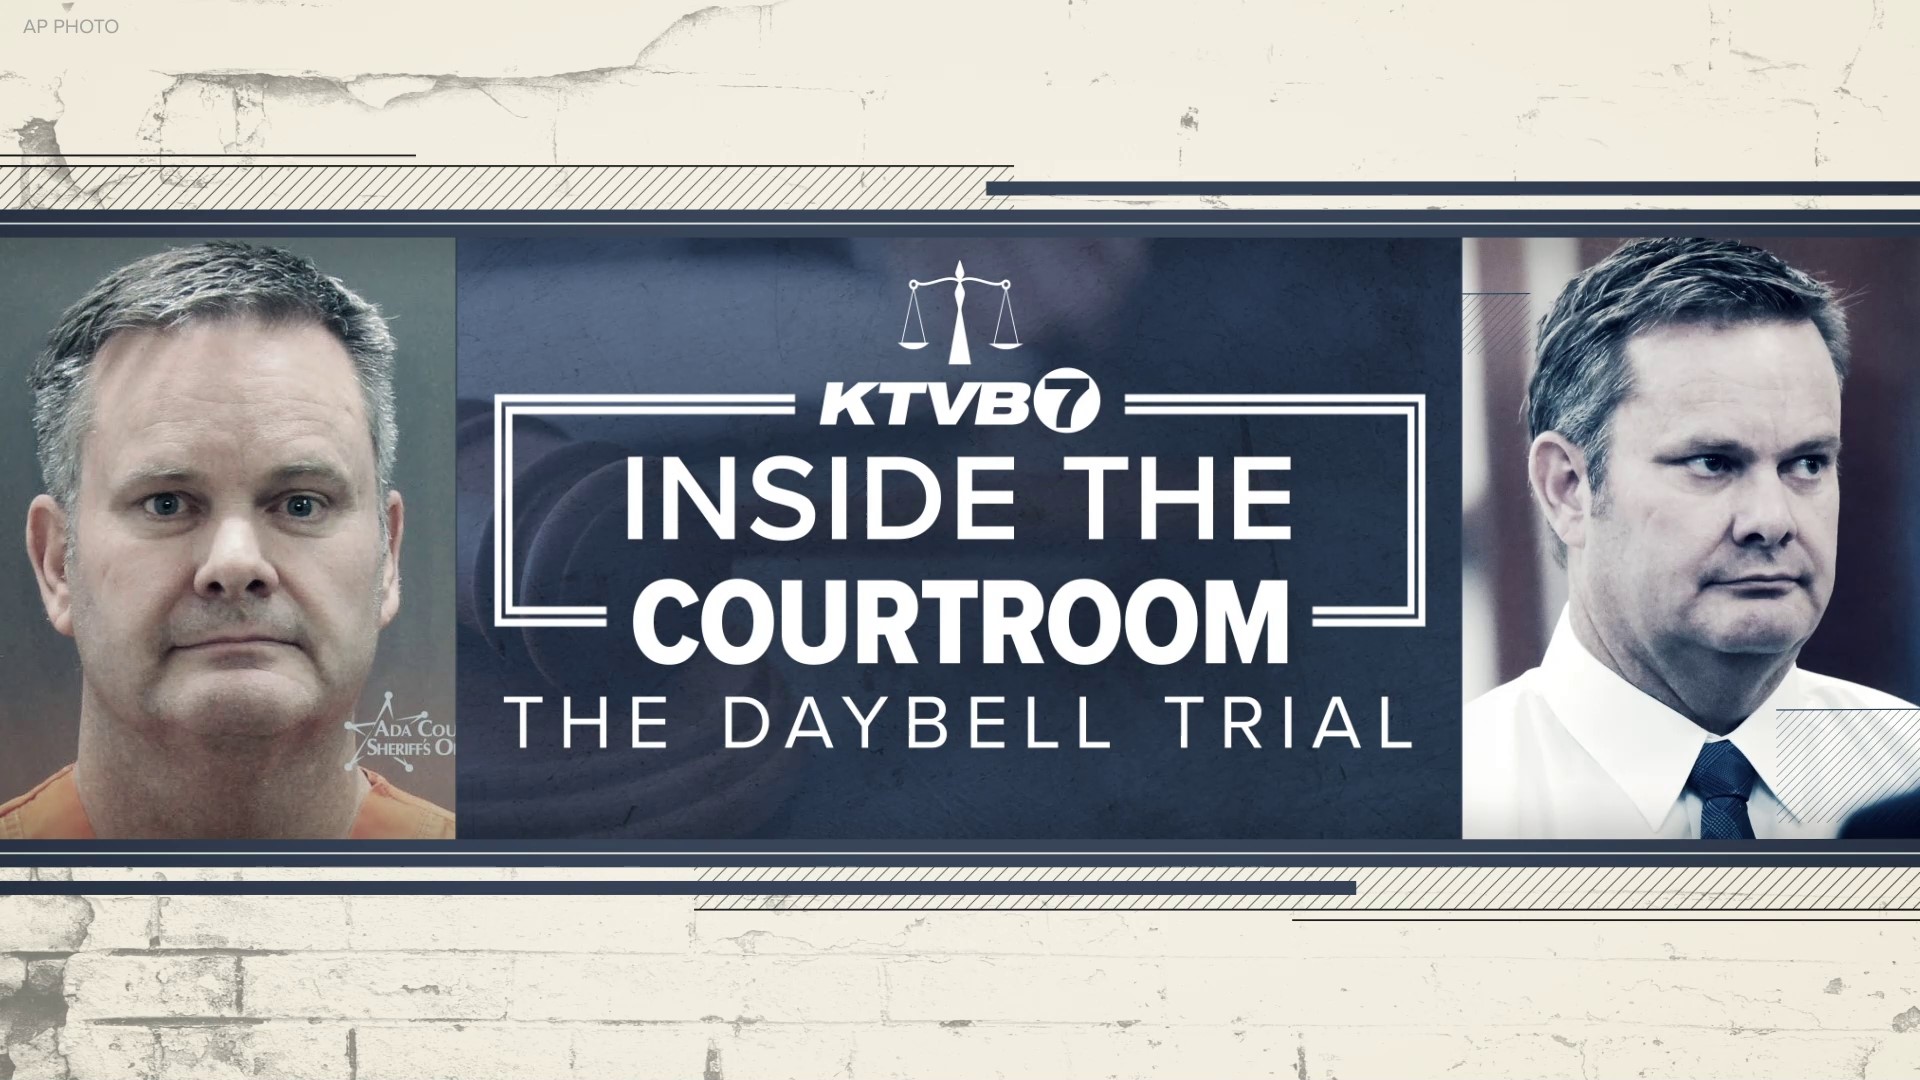 Tom Evans joins KTVB's Andrea Dearden to discuss the jury process and impacts, evidence presented in Daybell's trial and unanswered questions from Vallow's trial.